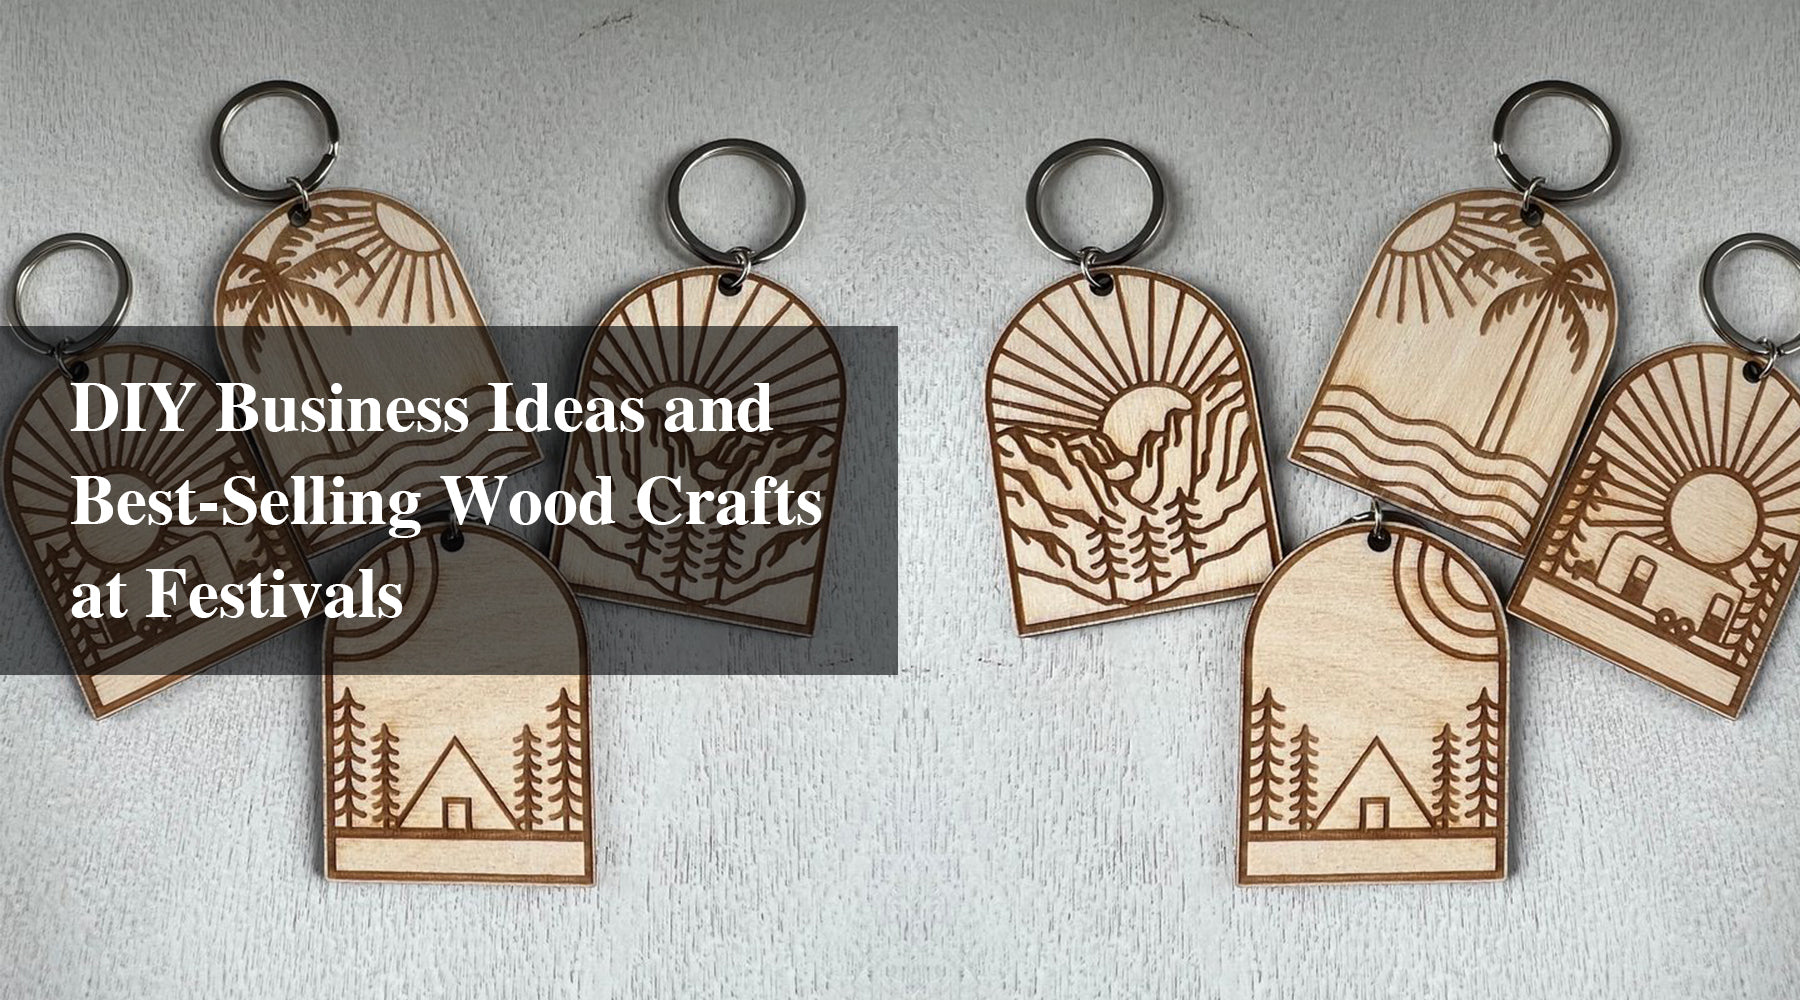 DIY Business Ideas and Best-Selling Wood Crafts at Festivals